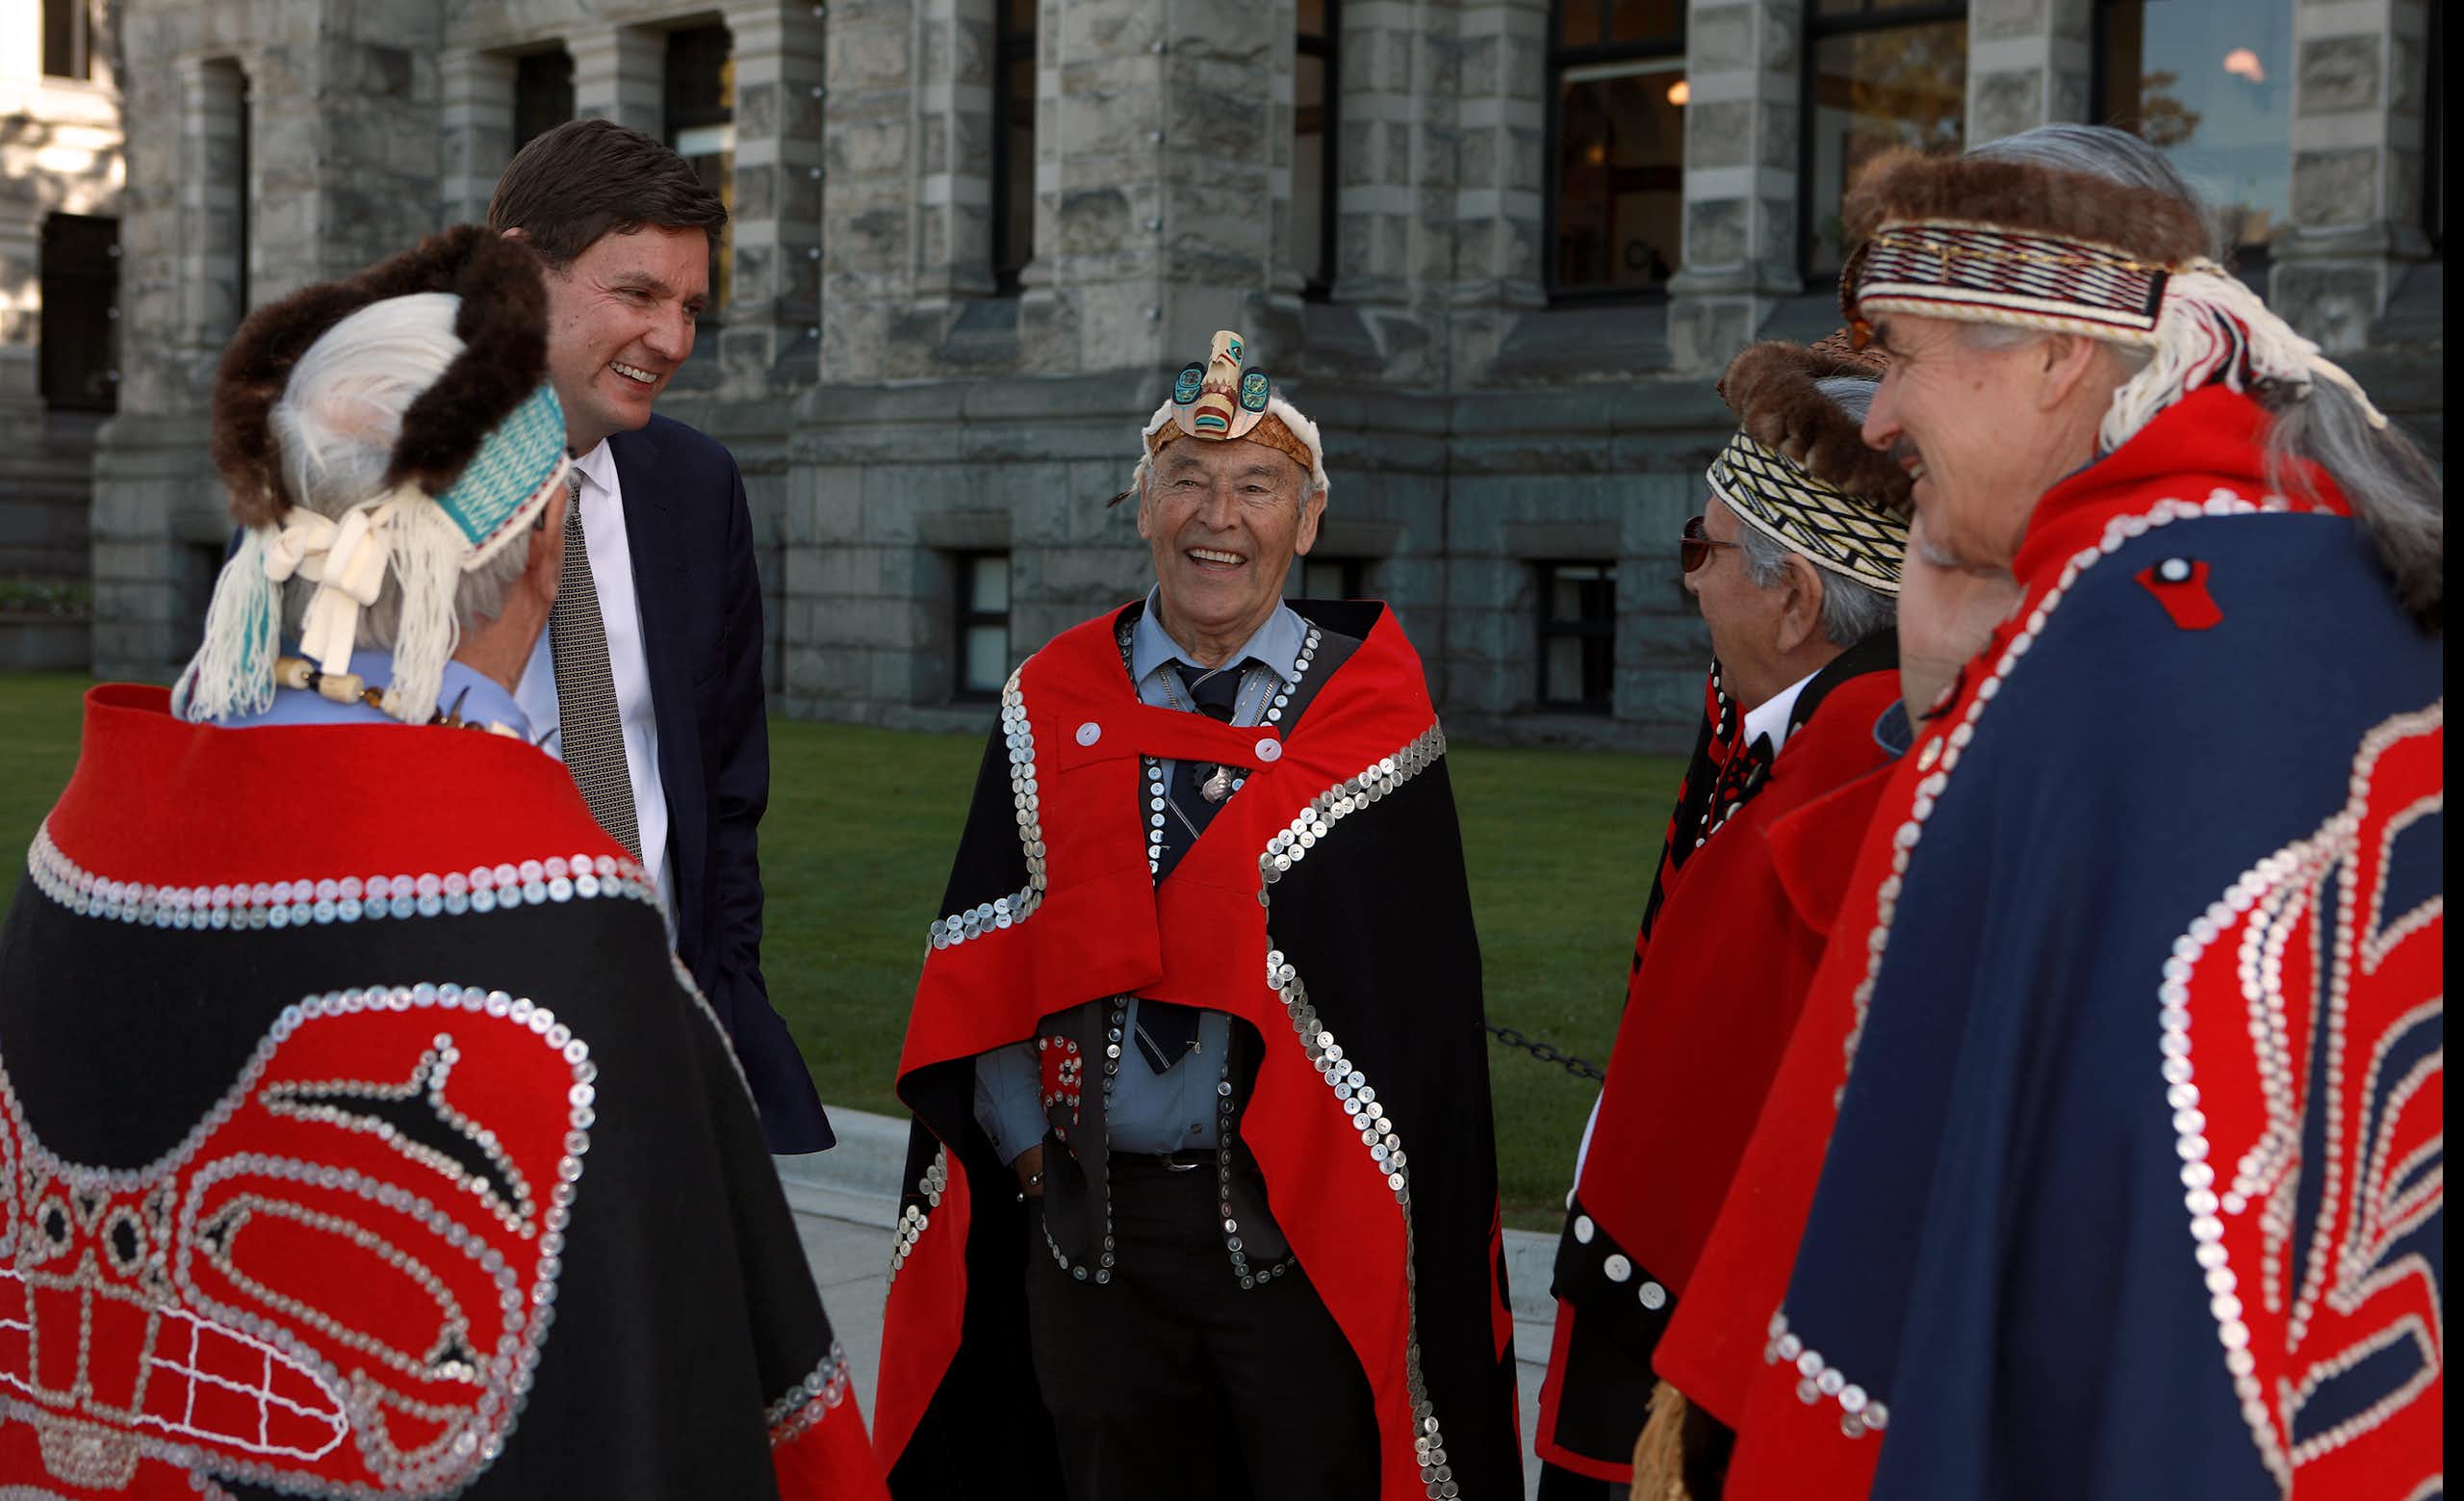 A man in a suit smile and he talks with Indigenous men in red and blue ceremonial garb who are also smiling.